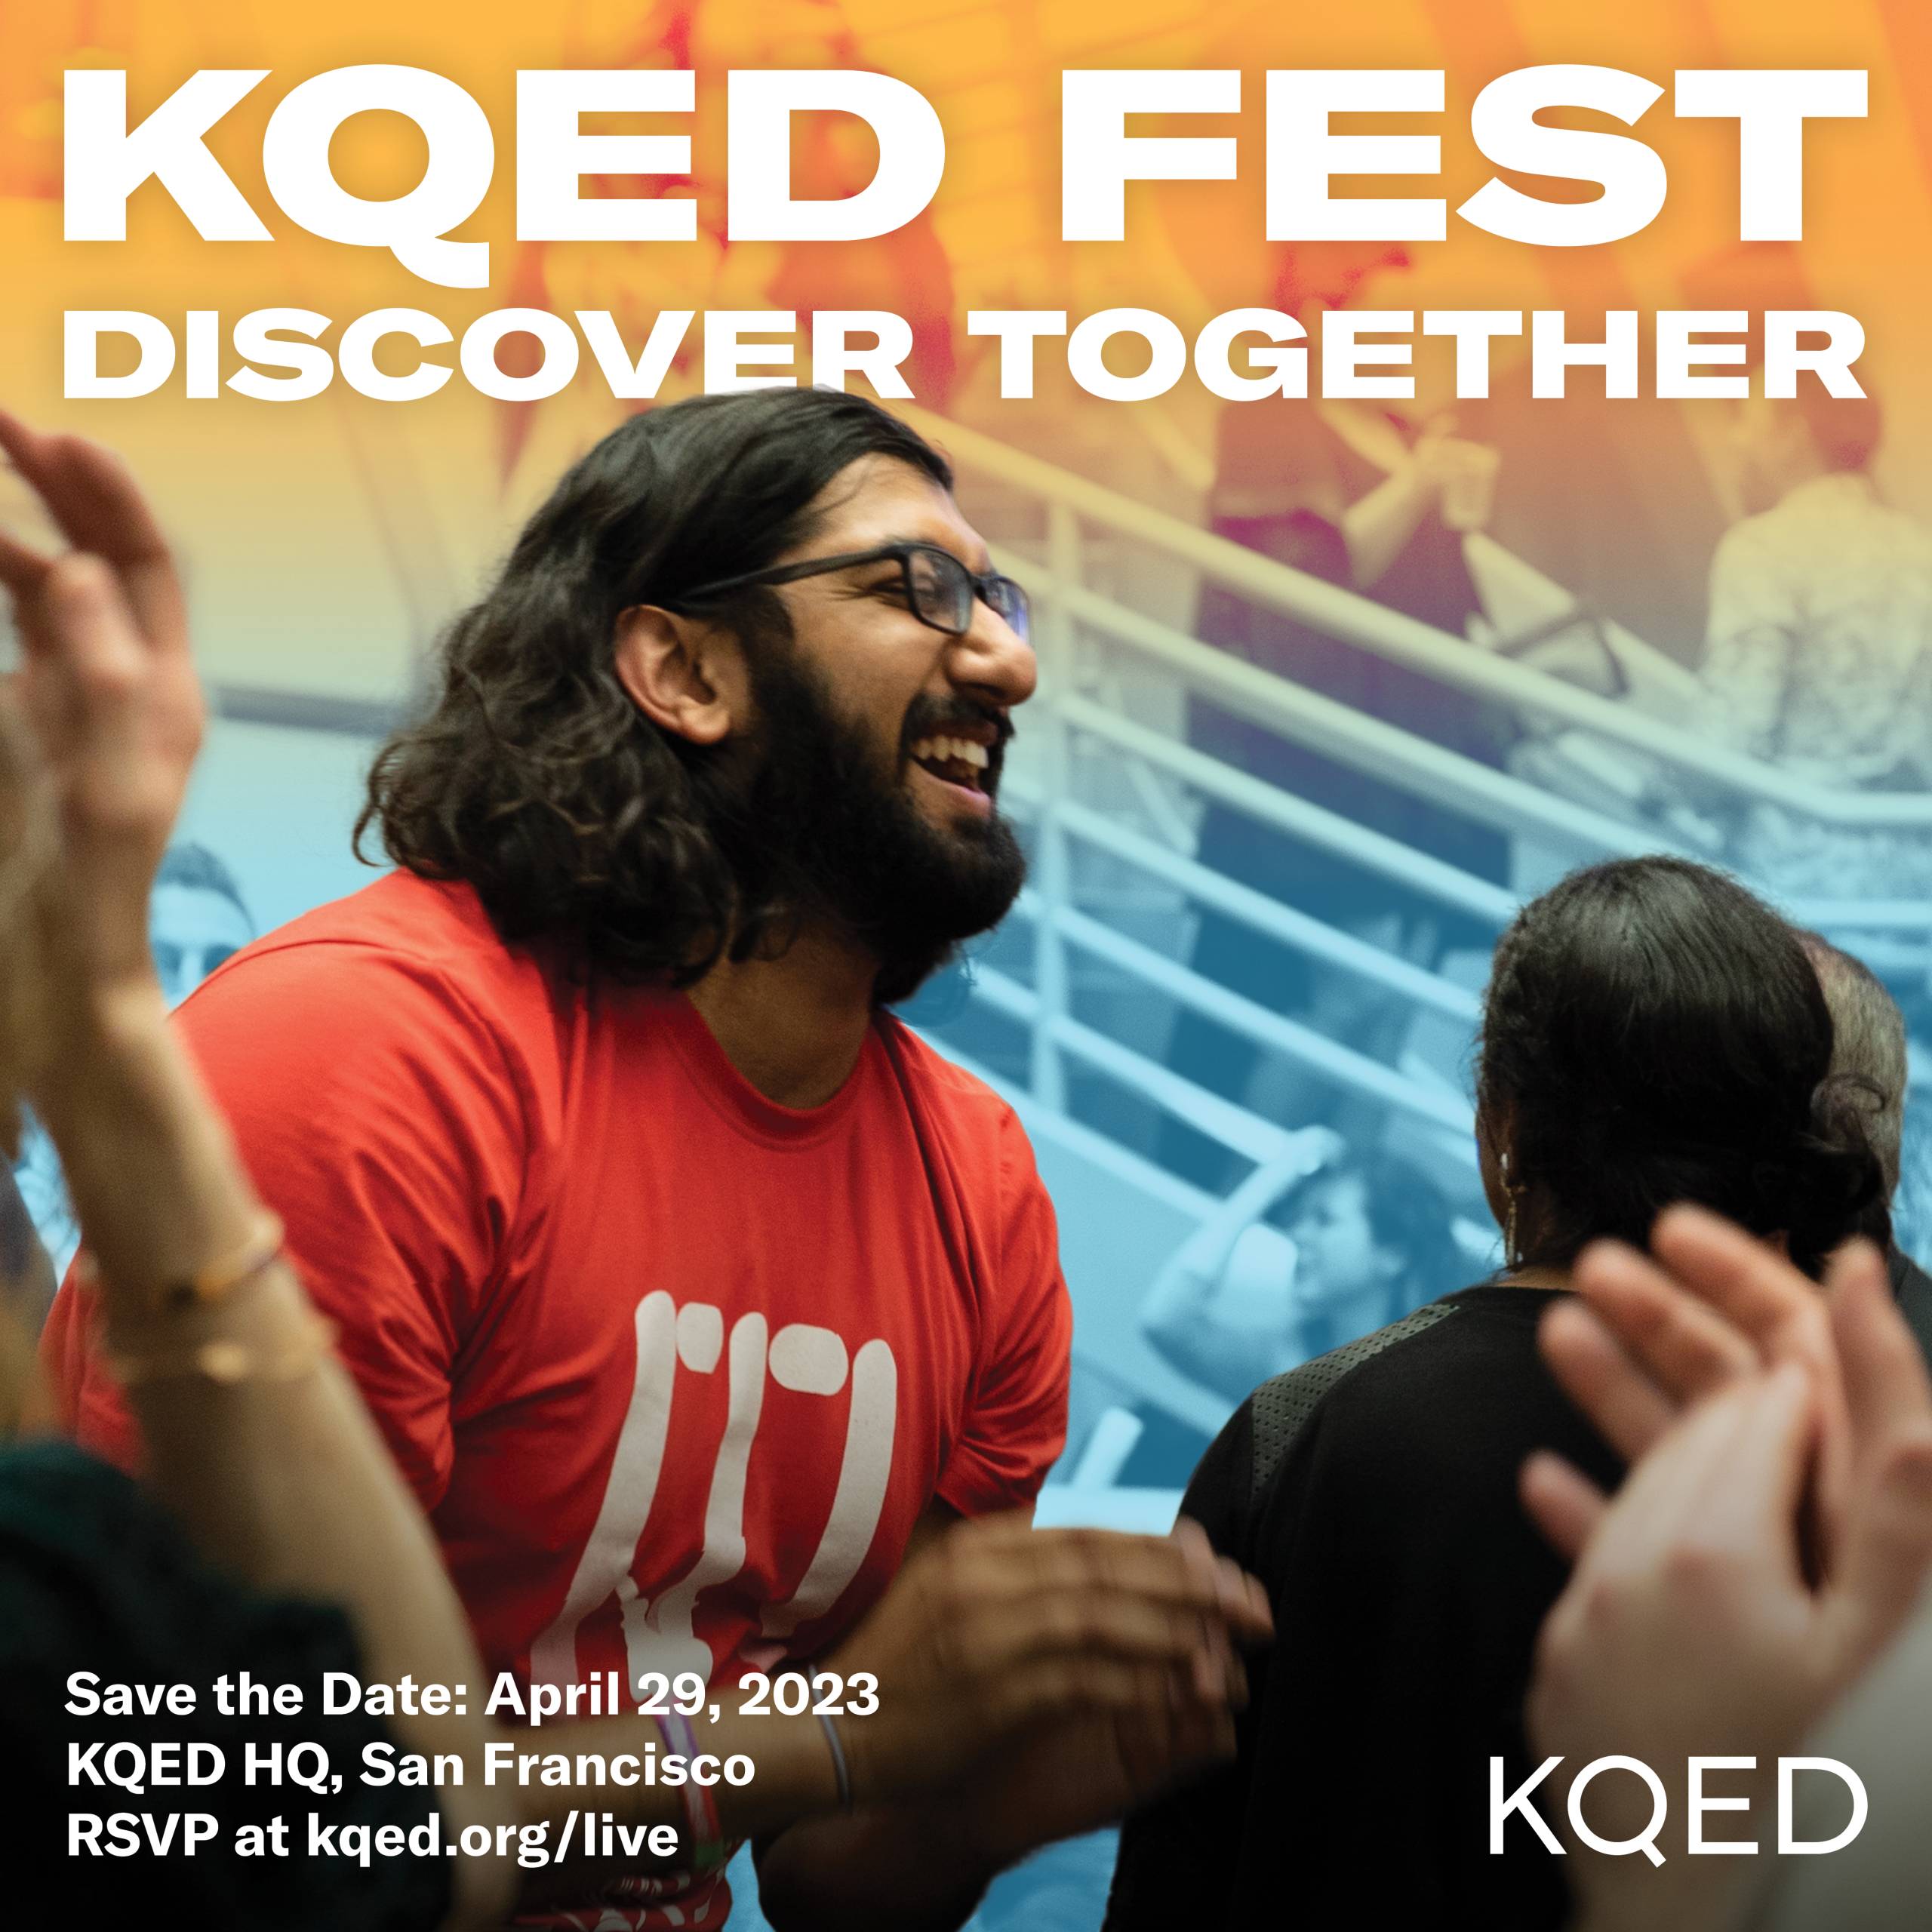 A man engaged with a crowd laughs, "KQED Fest: Discover Together" is titled at the top of the image